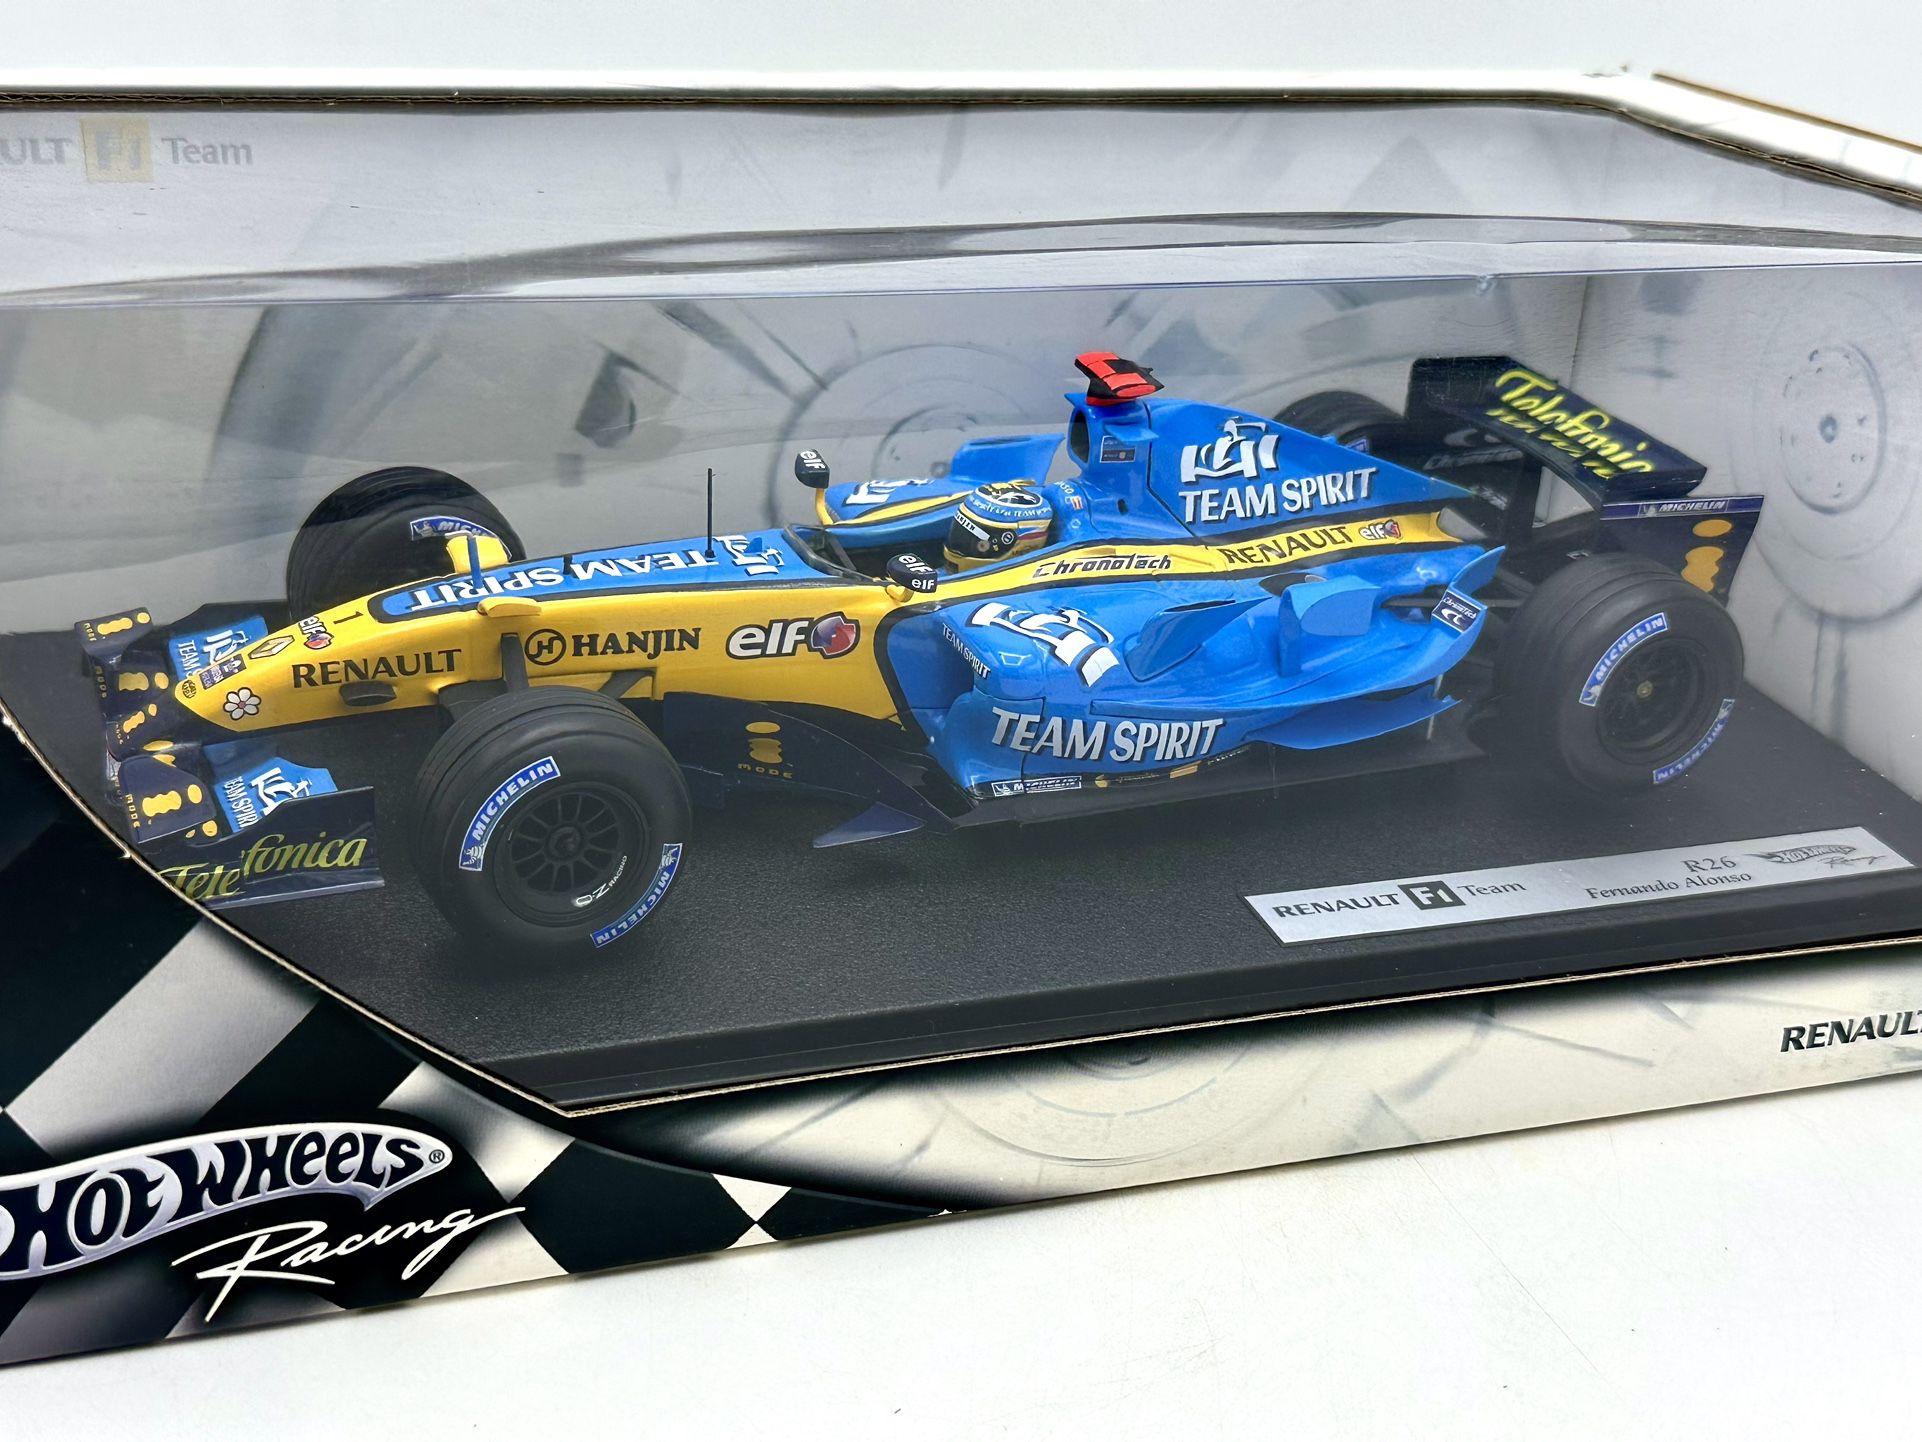 Hot Wheels 1:18 Scale Diecast Model - Renault F1 Team R26 Fernando Alonso  for Sale in Los Angeles, CA - OfferUp